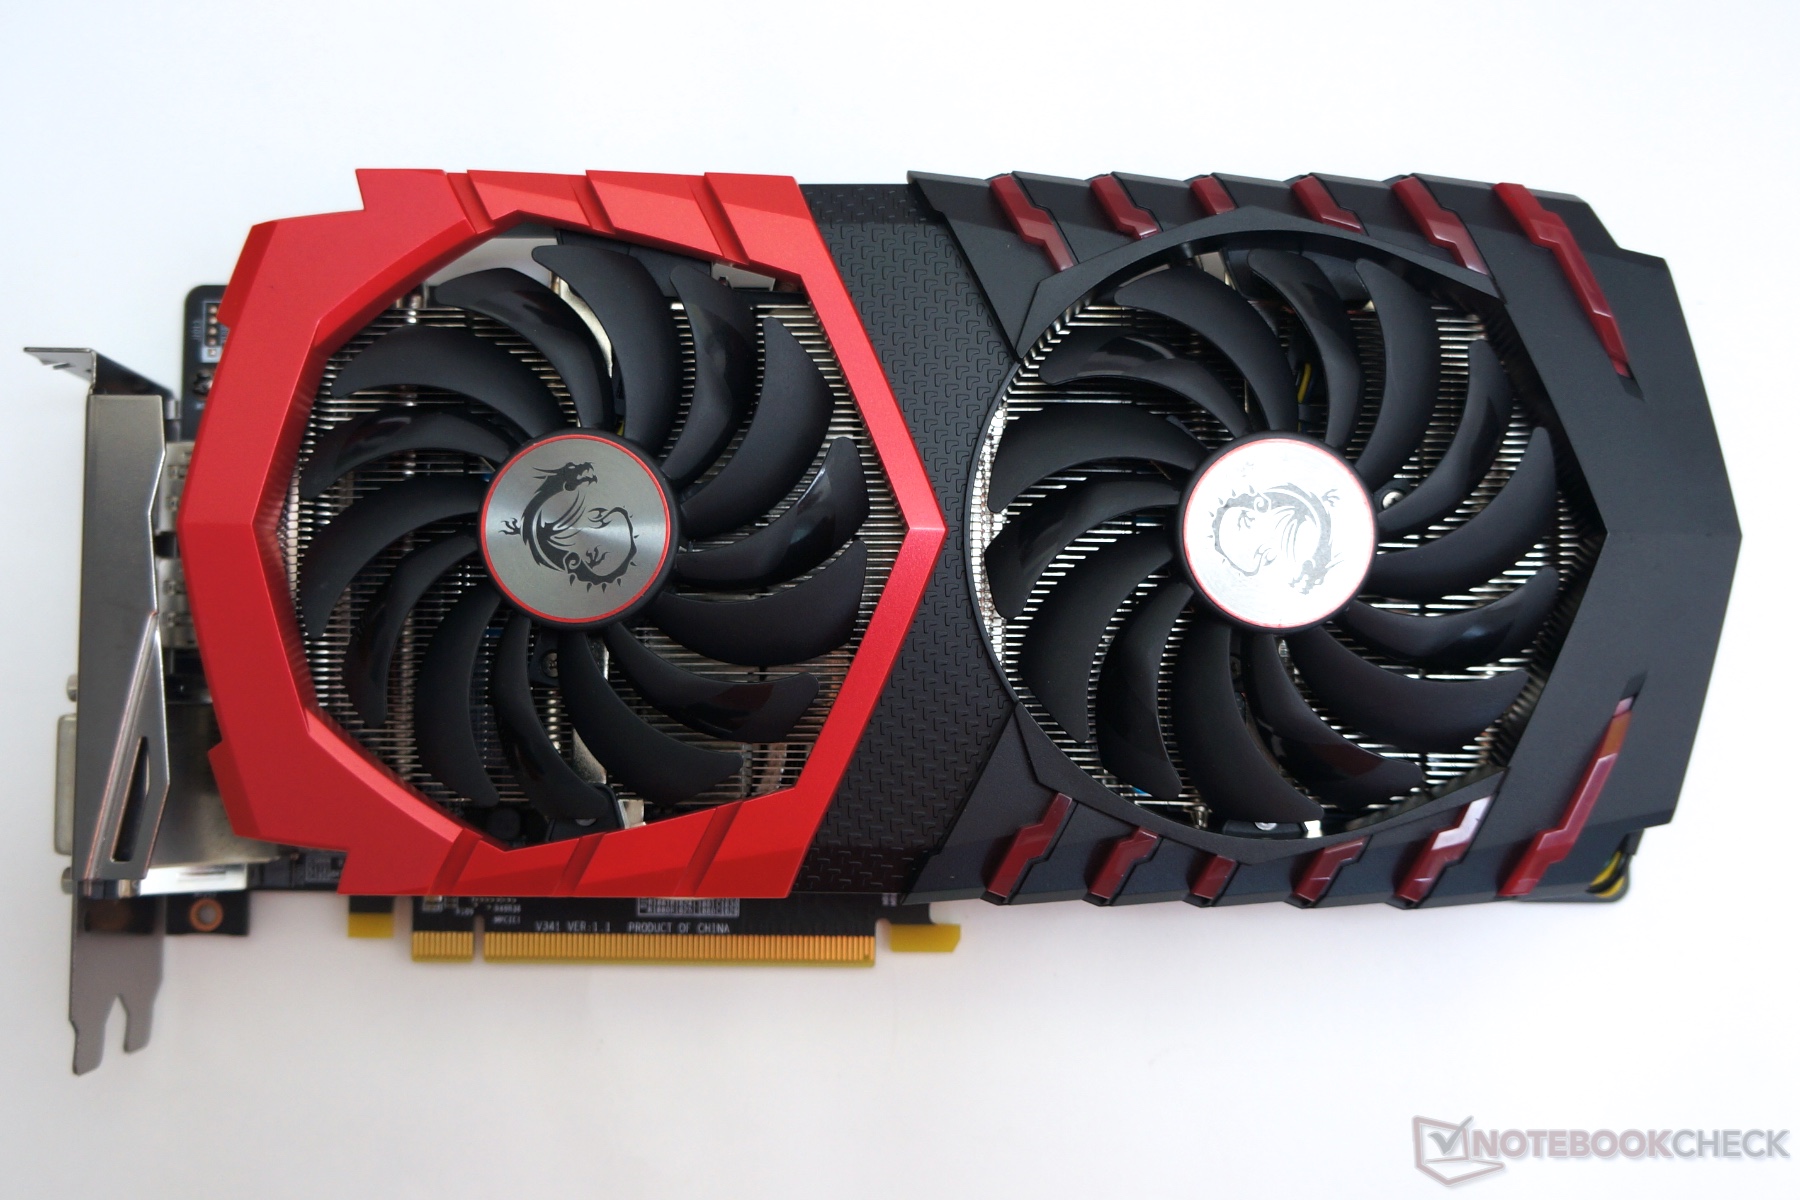 MSI Radeon RX 470 Gaming X 4 GB Review - NotebookCheck.net Reviews